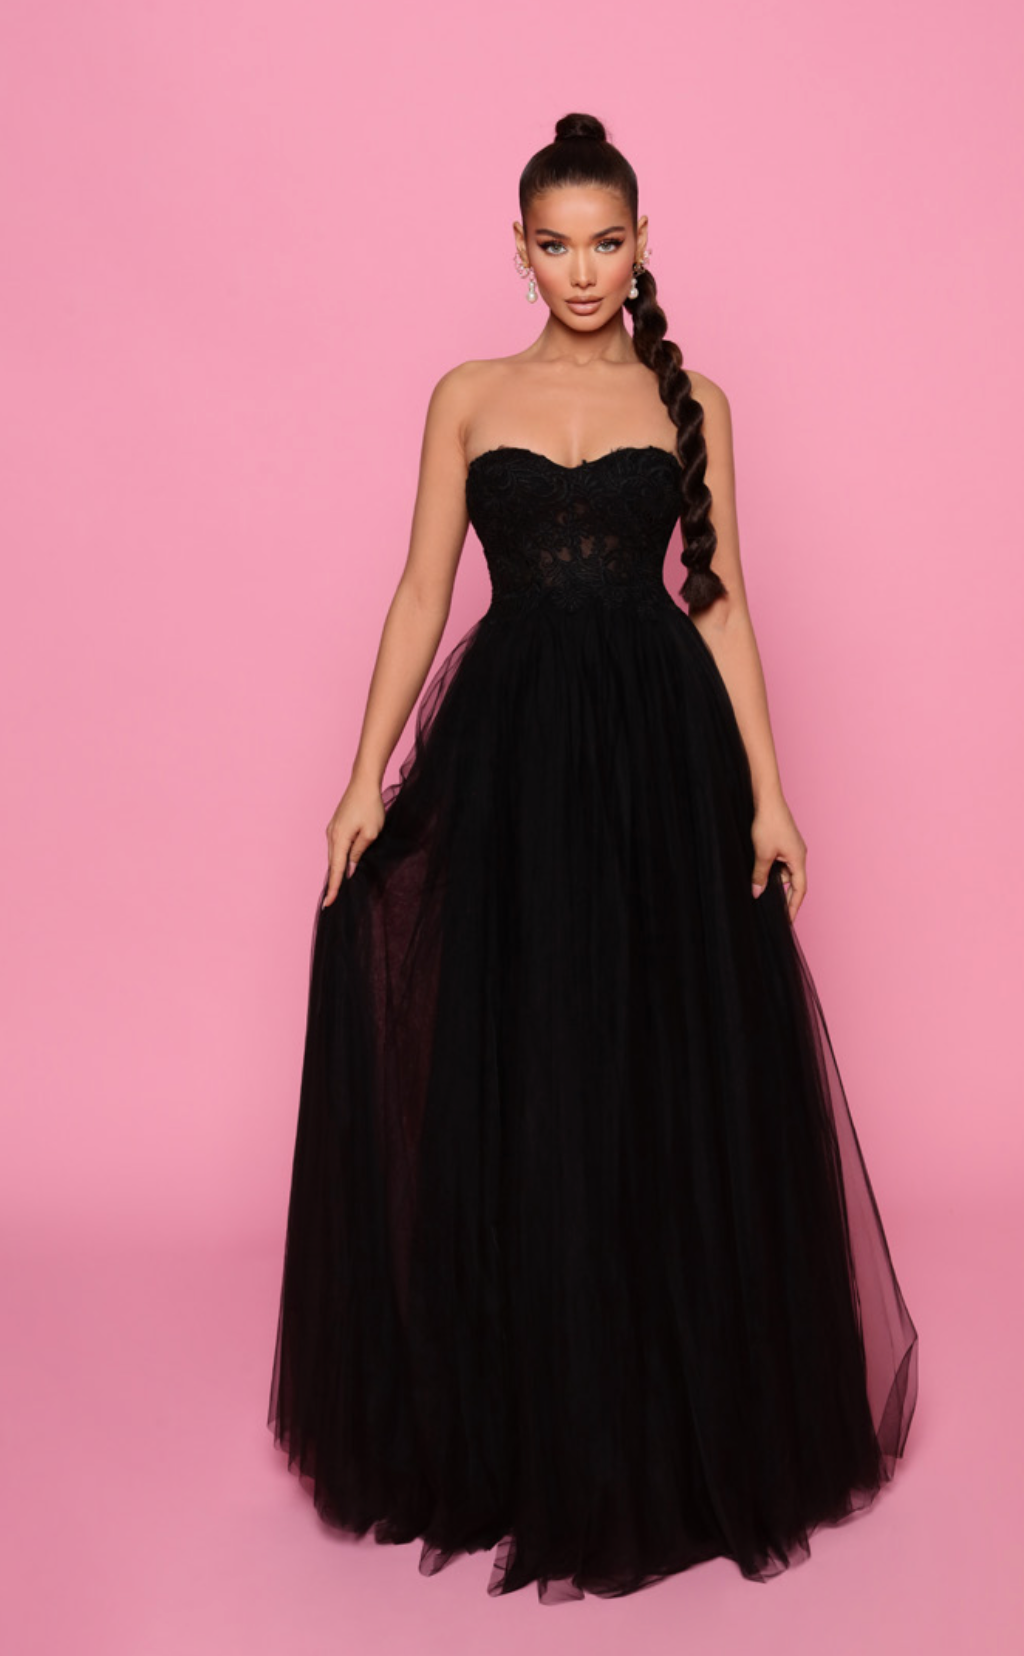 Bettina NP147 Gown by Jadore - Black